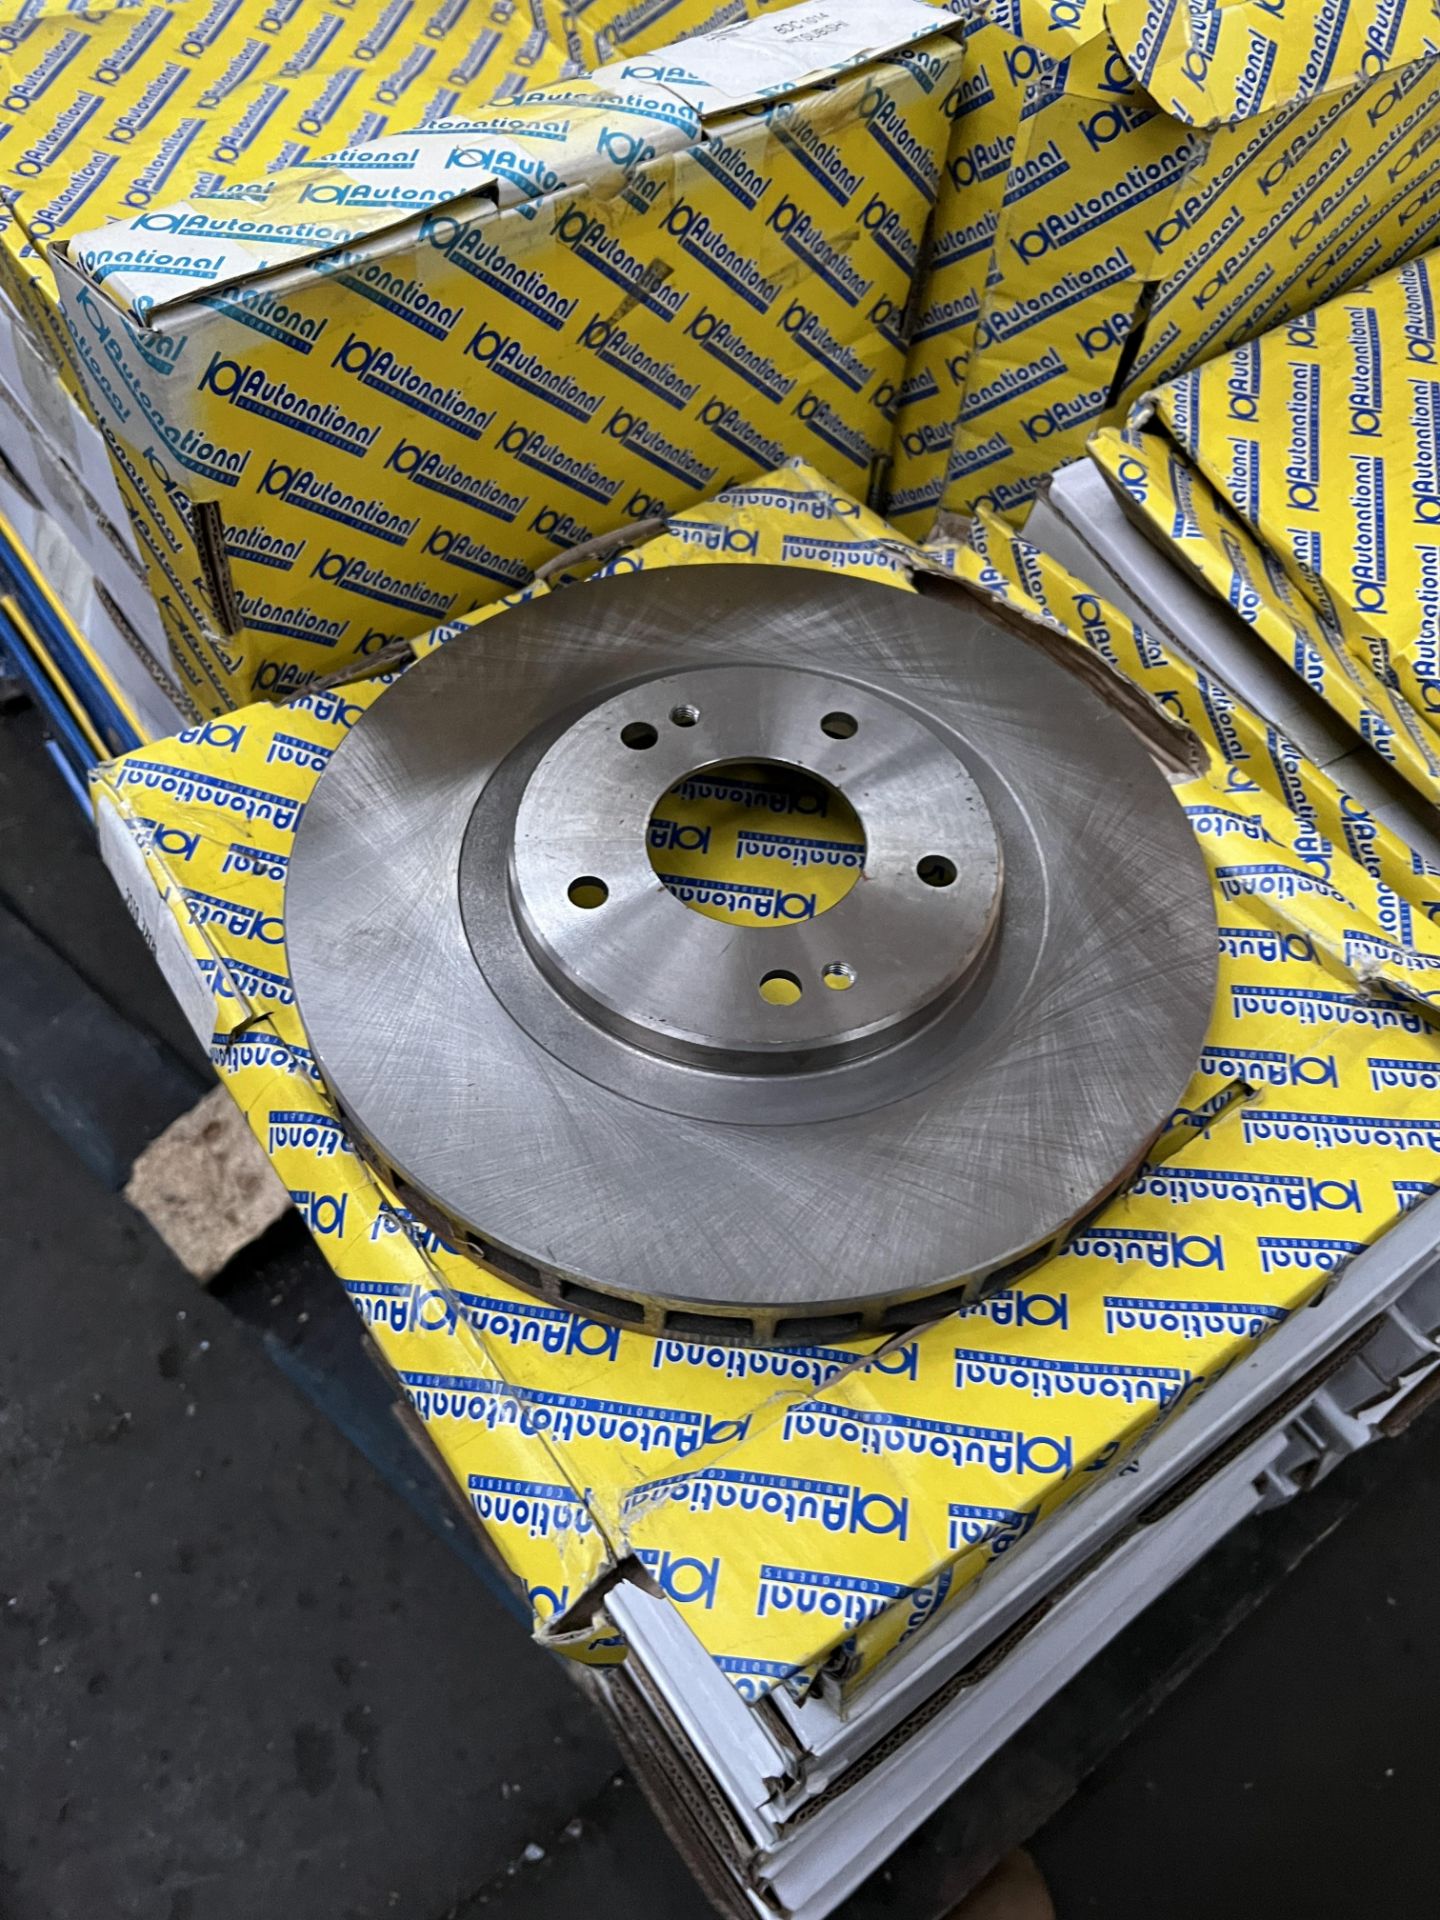 approx 70: Boxed and Sealed Autonational Vented Front Brake Discs for Mitsubishi 3000GT 3.0 Twin - Image 18 of 19